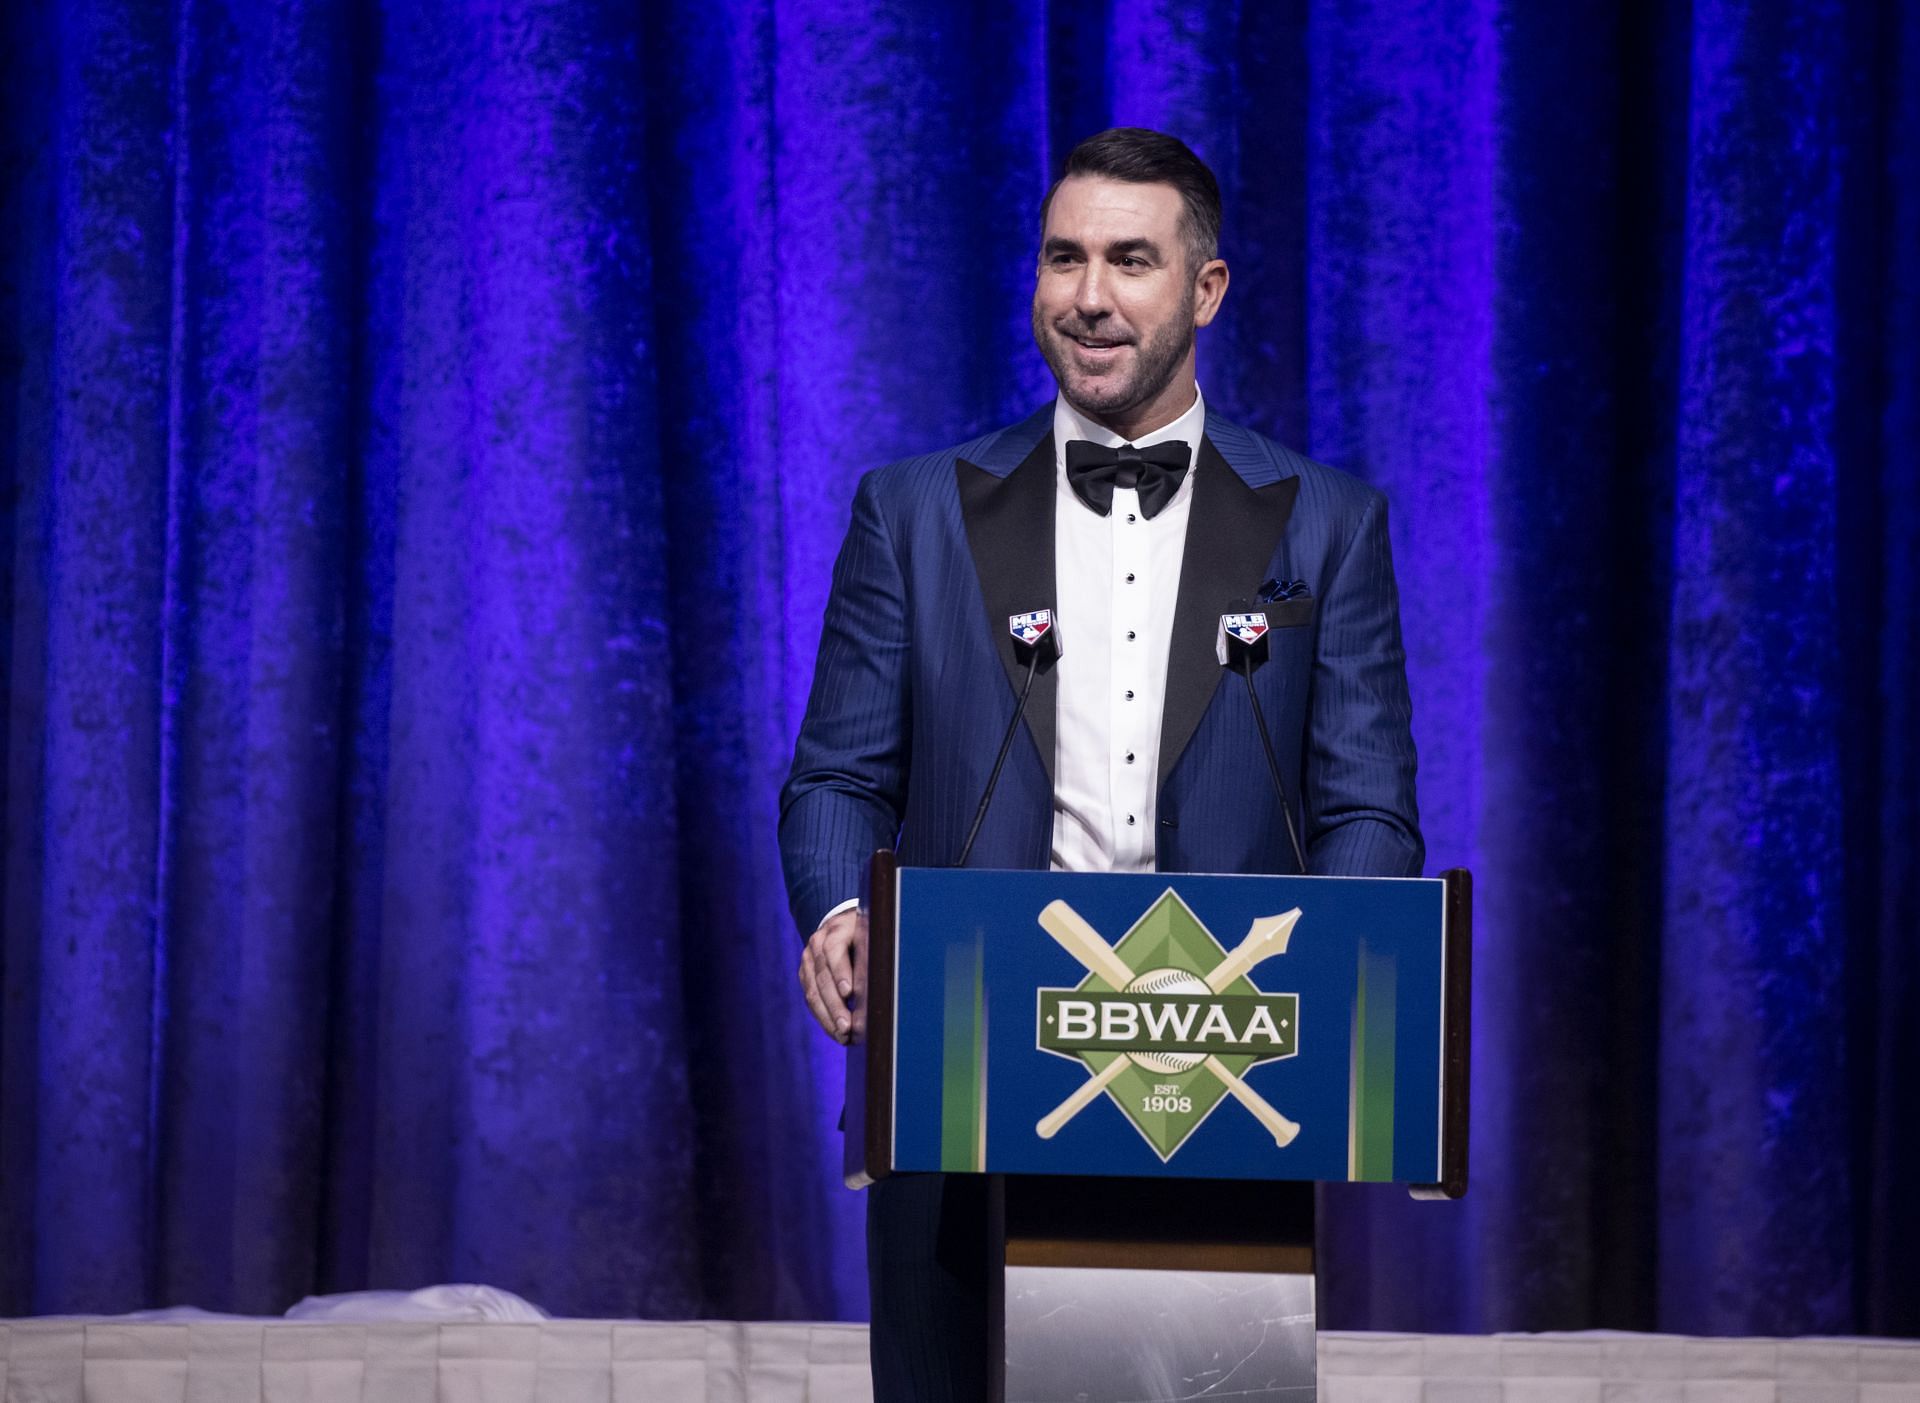 2023 BBWAA Dinner: NEW YORK, NY - JANUARY 28: Justin Verlander receives the American League Cy Young Award during the 2023 Baseball Writers&#039; Association of America awards dinner at New York Hilton on January 28, 2023 in New York City. (Photo by Michelle Farsi/Getty Images)